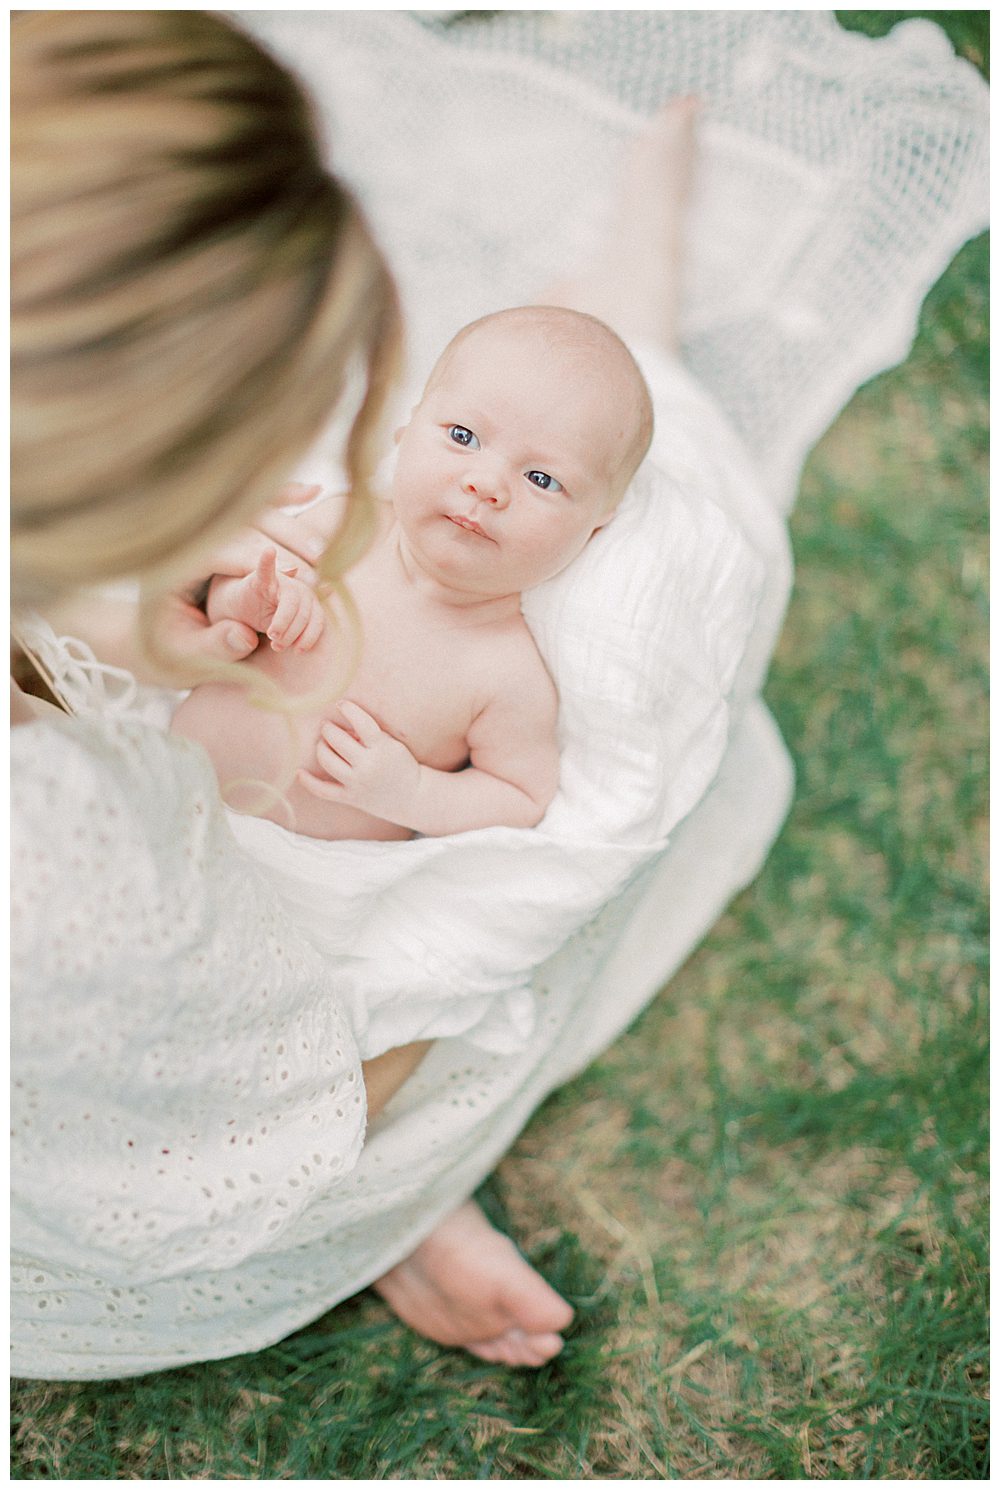 Newborn baby girl looks up at her mother during their outdoor newborn session.